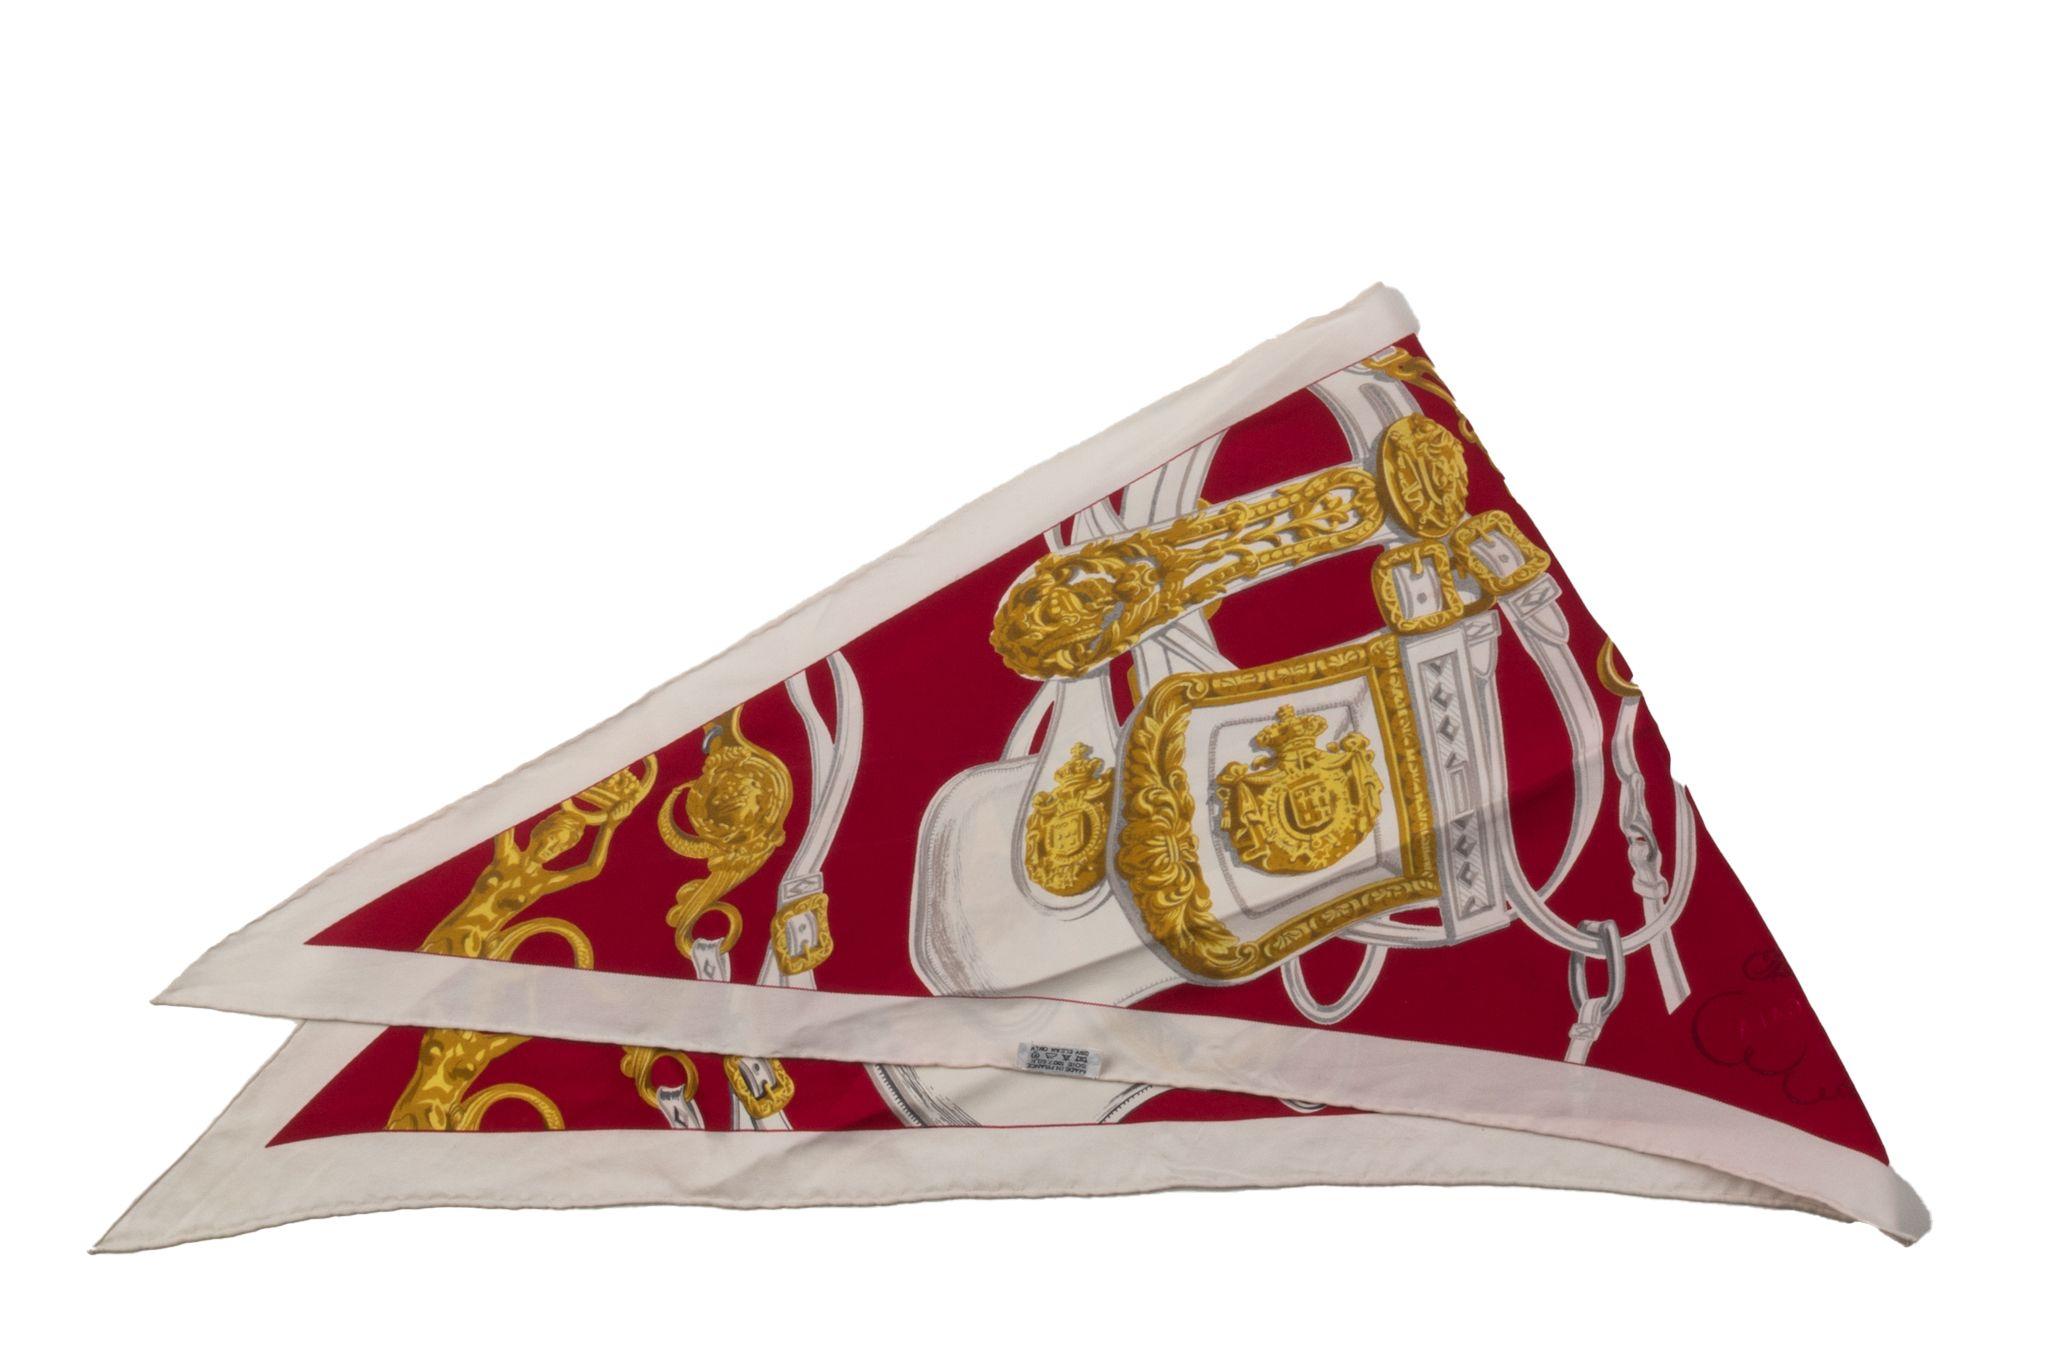 Hermes collectible triangle brides de gala silk scarf. Burgundy and white combination . 100% silk. Hand rolled edges.
